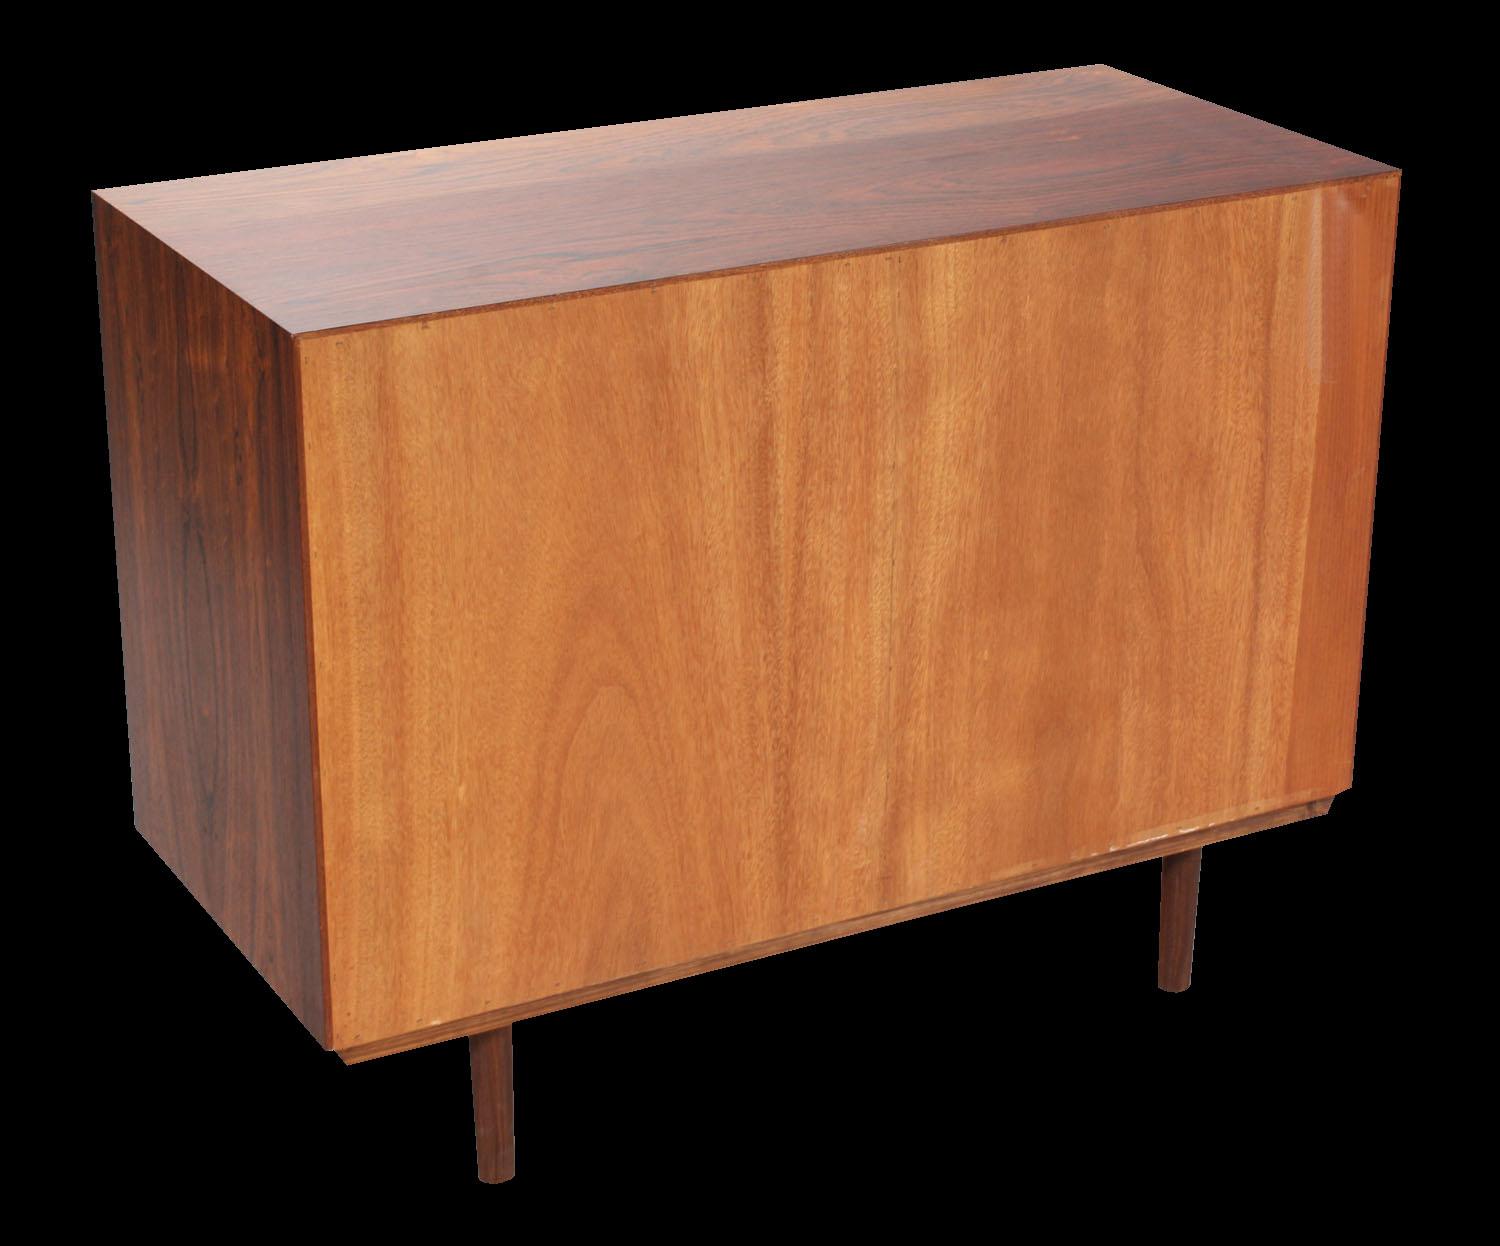 Aluminum Rosewood Chest of 8 Drawers by Axel Christiansen for ACD Mobler